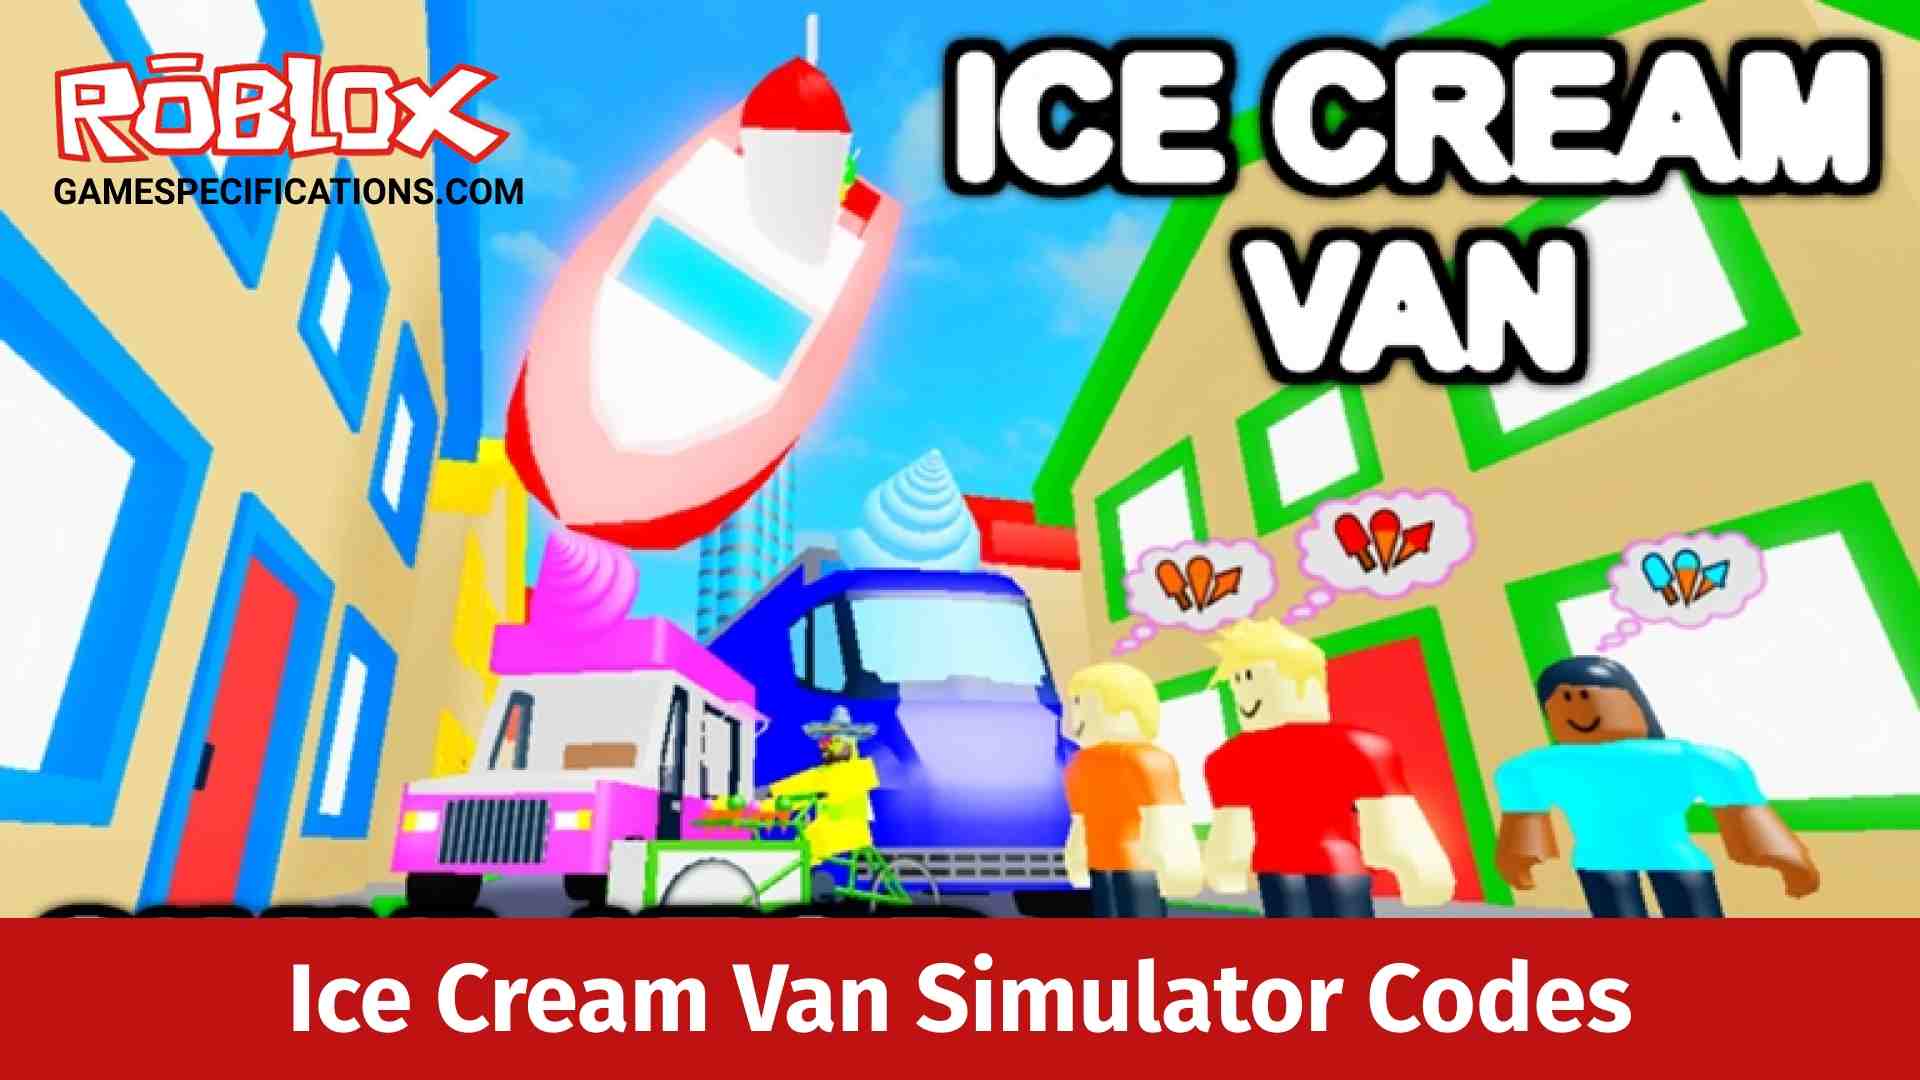 70 Working Roblox Ice Cream Van Simulator Codes 2021 Game Specifications - roblox meep city codes wings